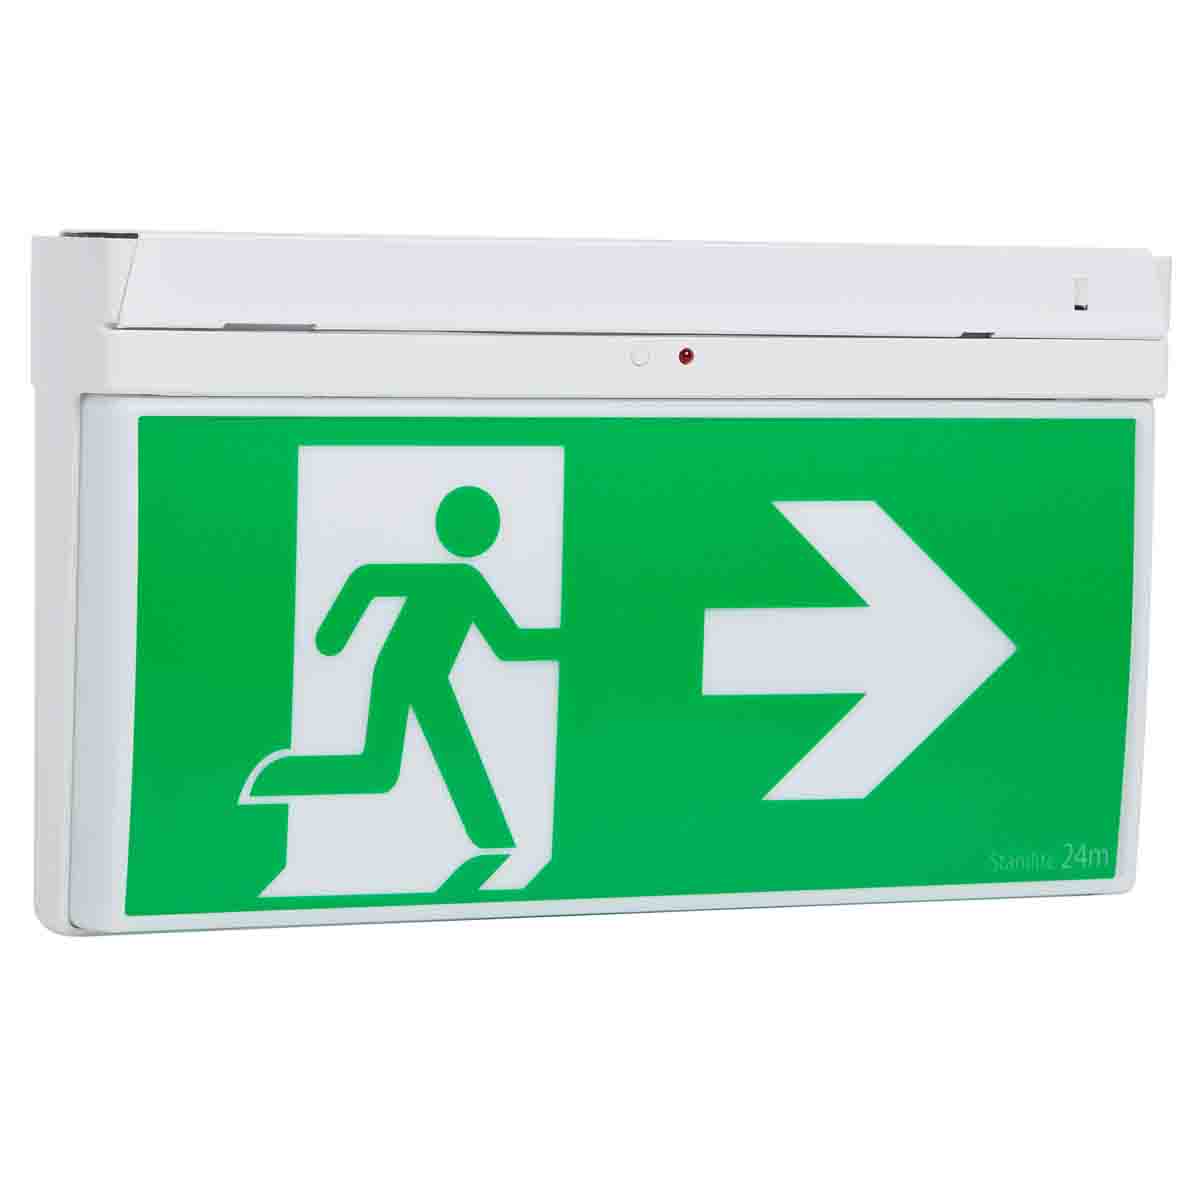 ABB LED Emergency Lighting, 3.2 W, Maintained